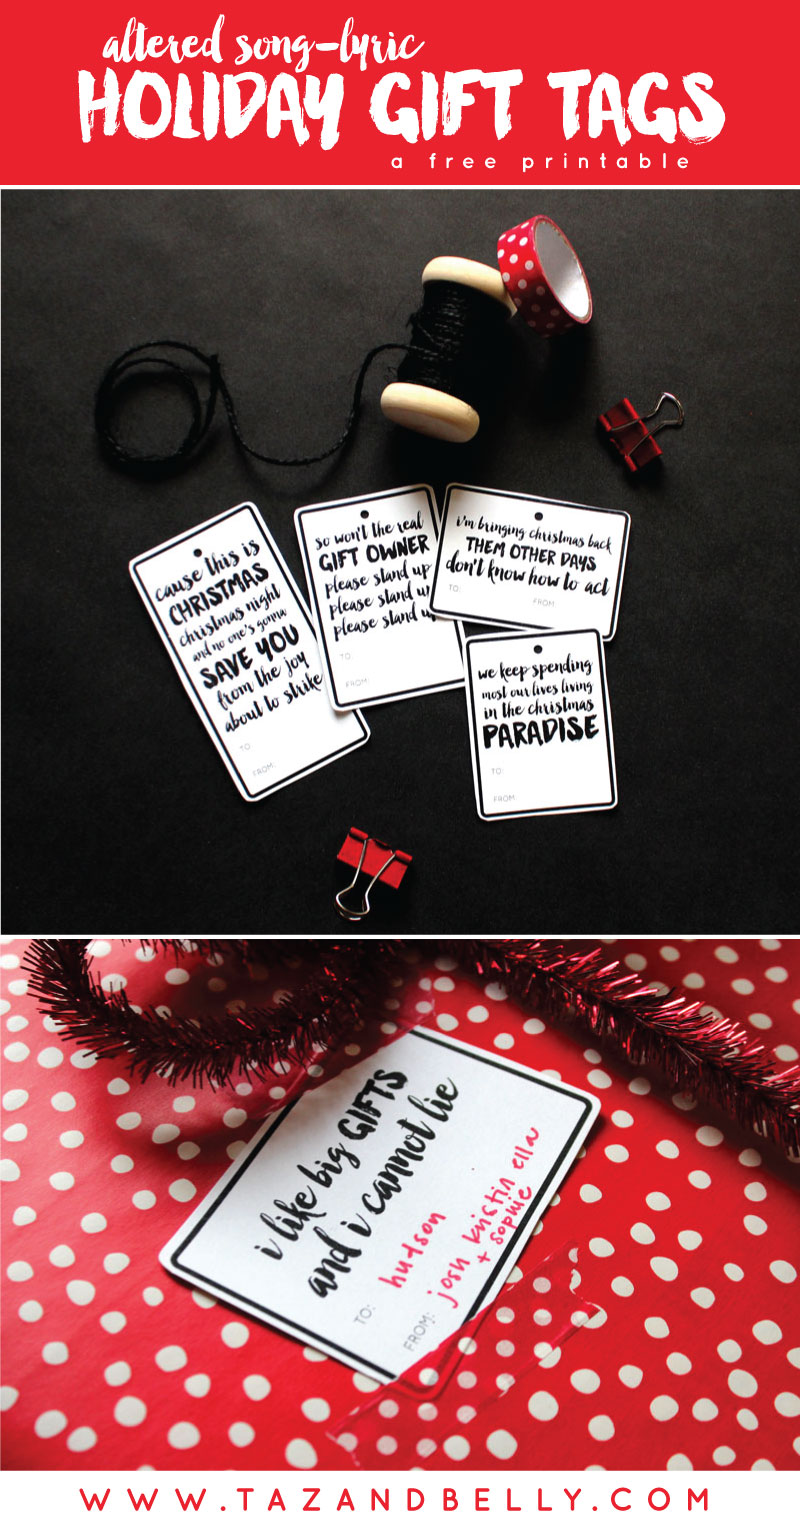 Christmas DIYs don't all have to be serious and boring. Try these hilarious altered song lyric gift tags that are guaranteed to make your guests laugh! | tazandbelly.com